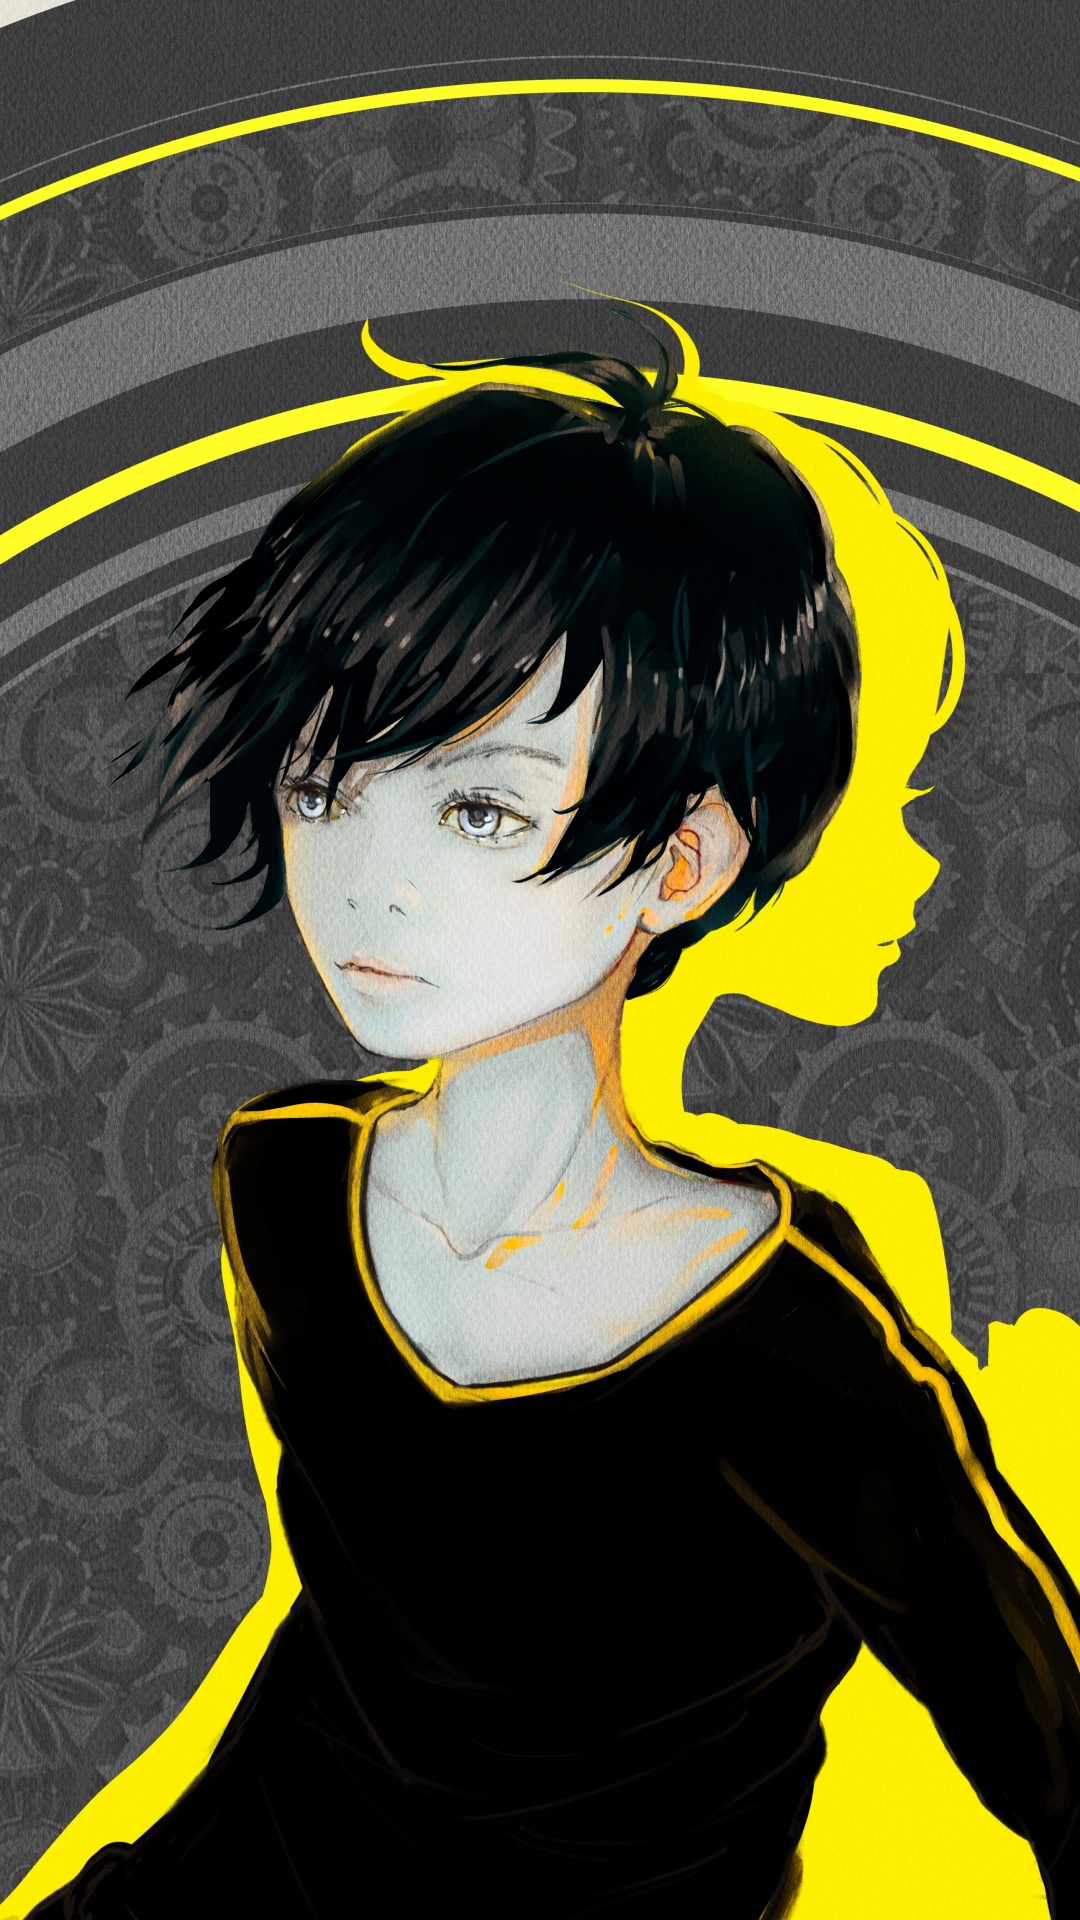 Black Haired Male Anime Character. Wallpaper in 1080x1920 Resolution